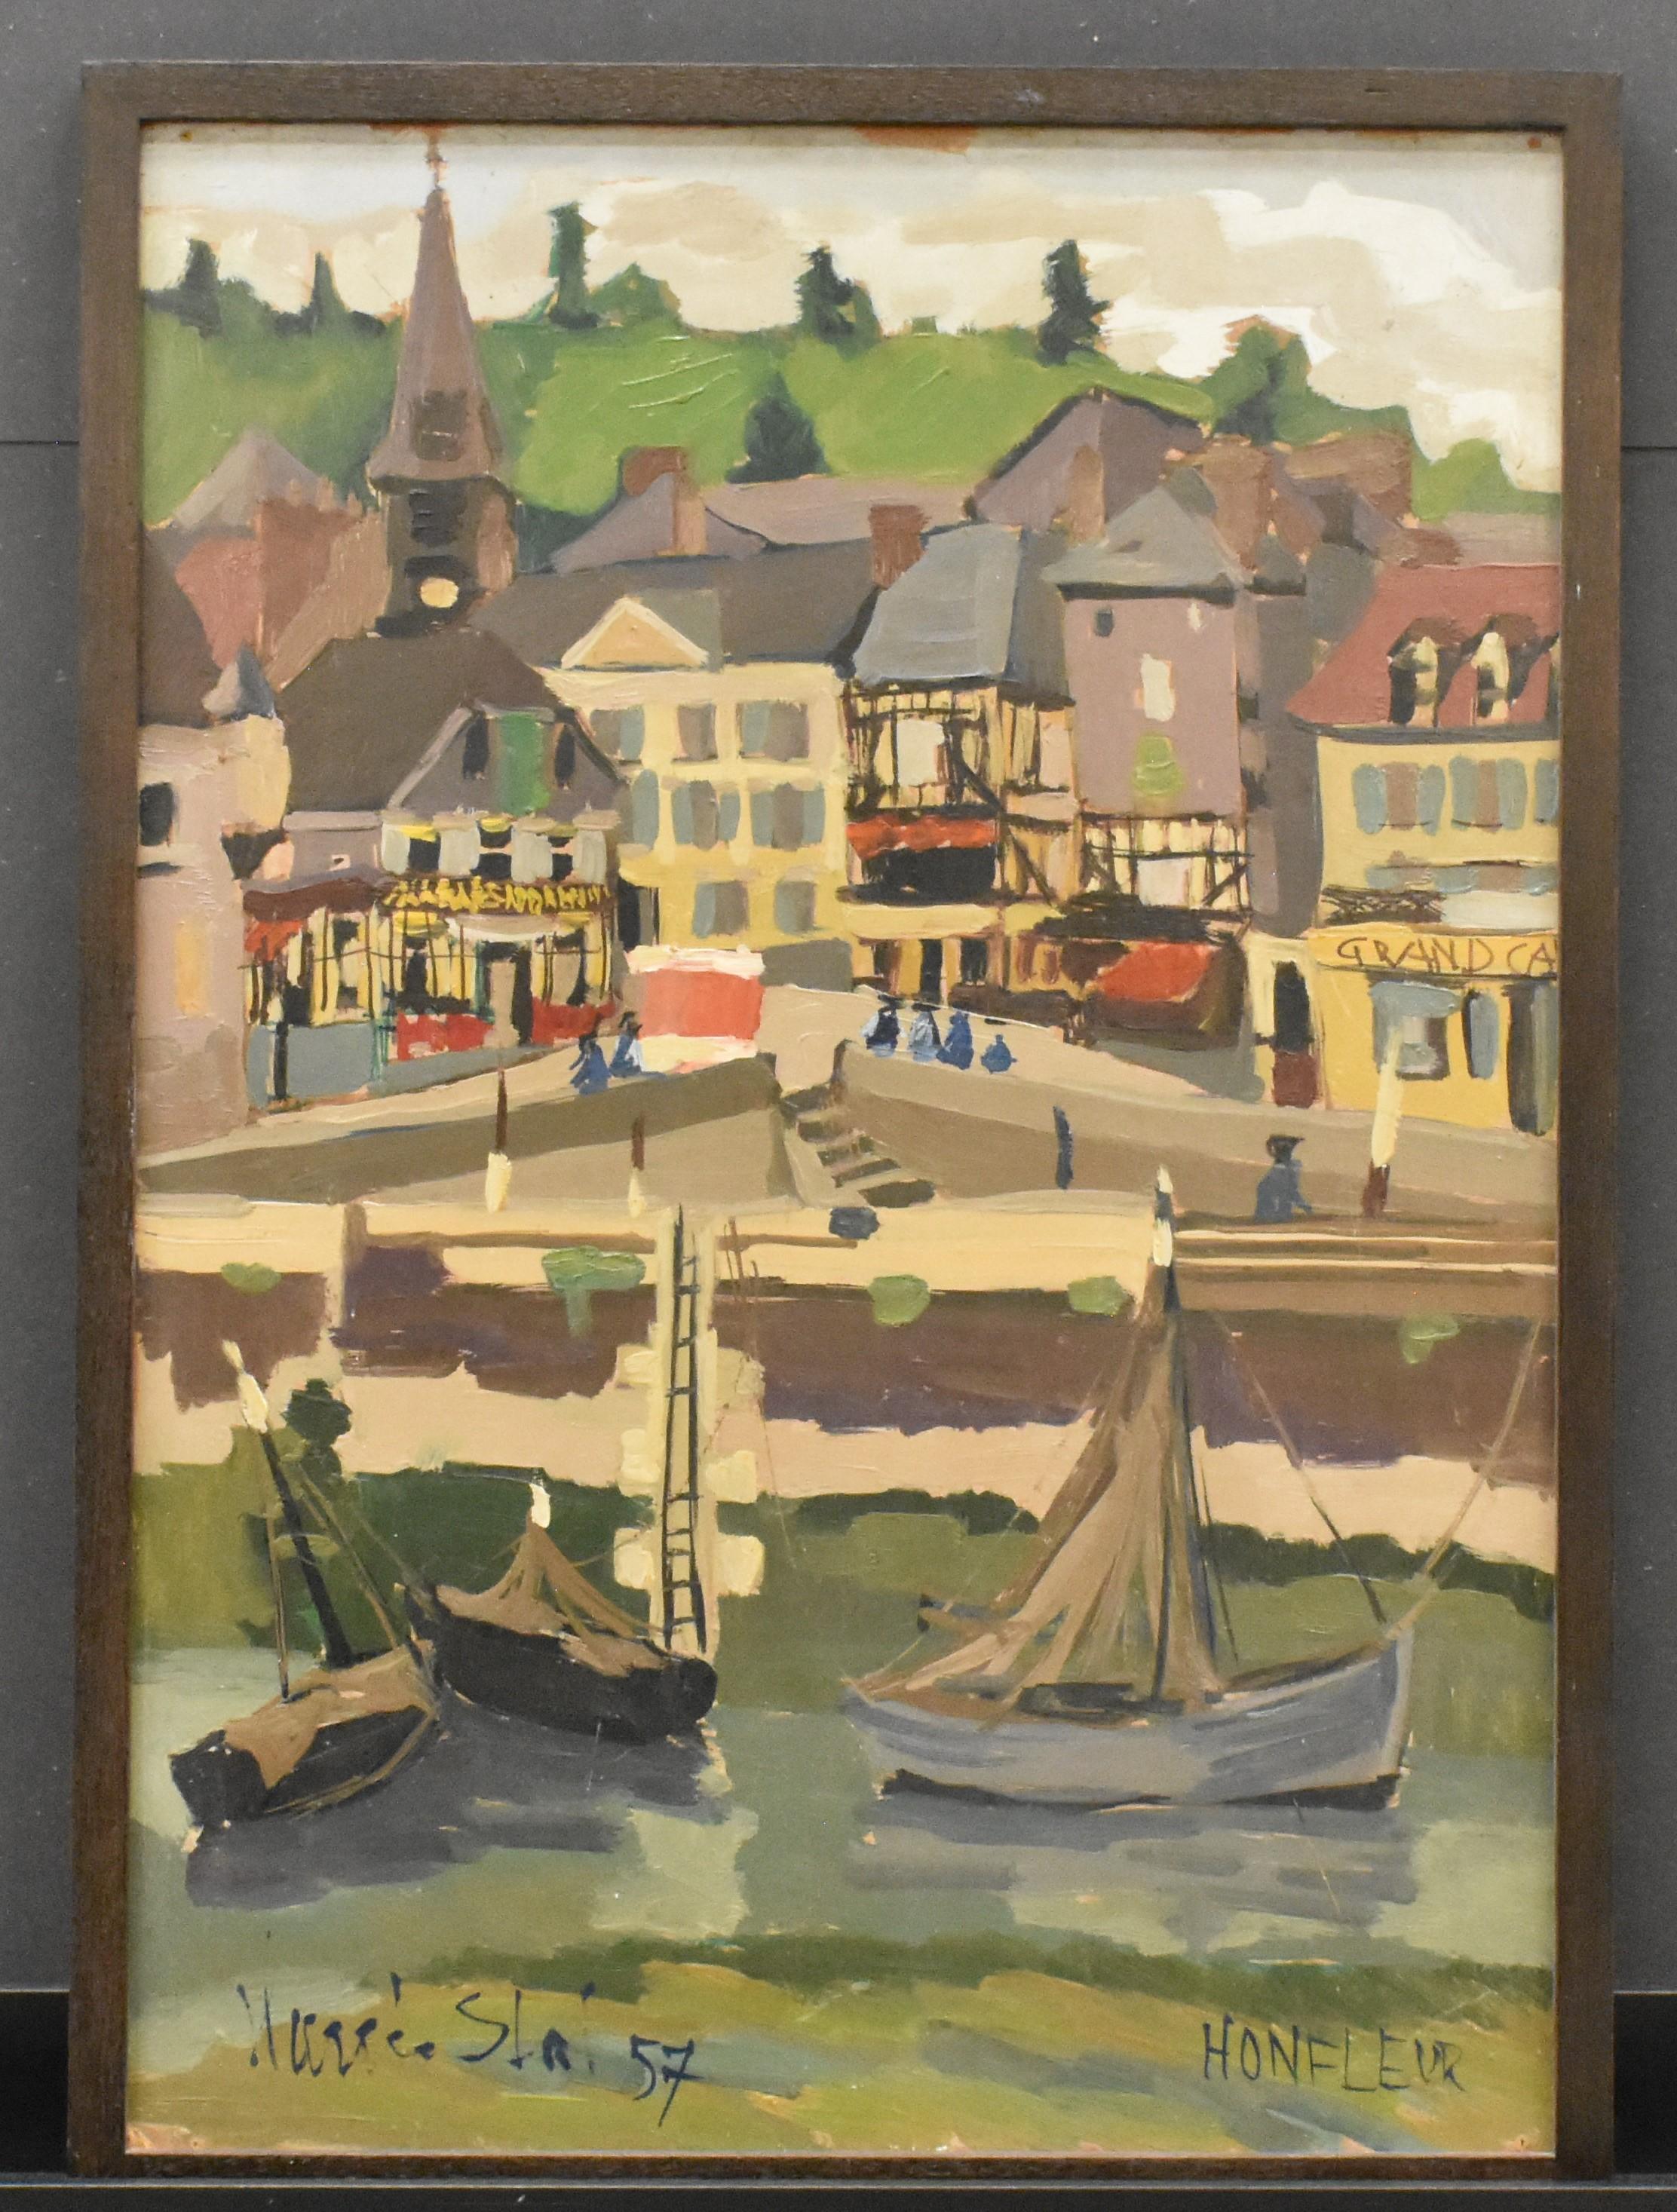 Harrie Stal Landscape Painting - Honfleur, France - Expressionist colourfull 